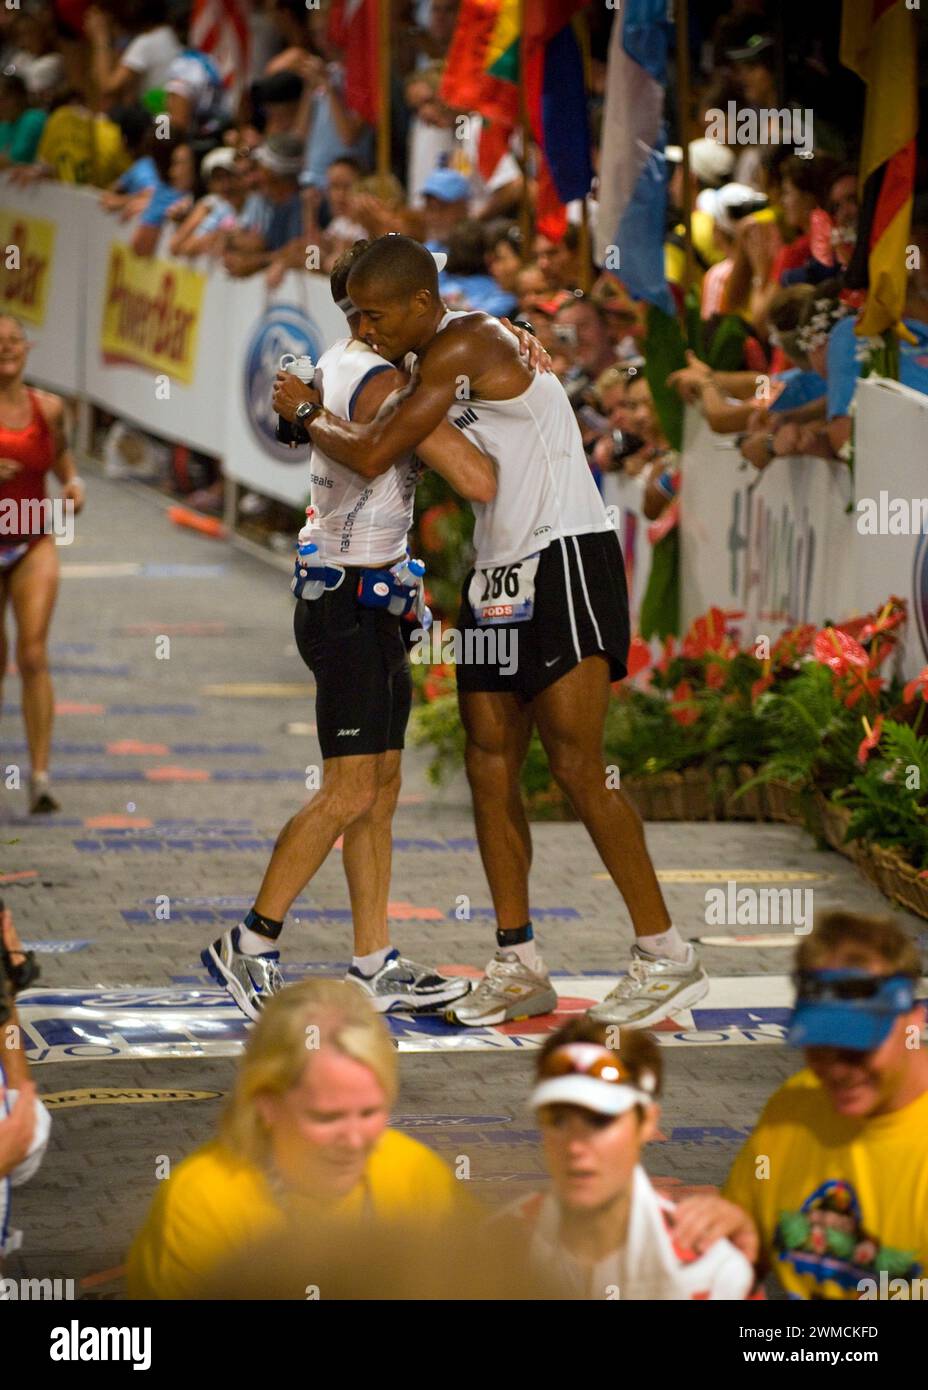 Kailua-Kona, United States of America. 11 October, 2008. U.S Navy Special Warfare Operator 1st Class David Goggins, right, embraces fellow Navy SEAL Cmdr. Keith Davids, commanding officer of SEAL Team One, as they cross the finish line together at the 30th Ford Ironman World Championship, October 11, 2008 in Kailua-Kona, Hawaii.  Credit: MC2 Paul Honnick/US Navy Photo/Alamy Live News Stock Photo